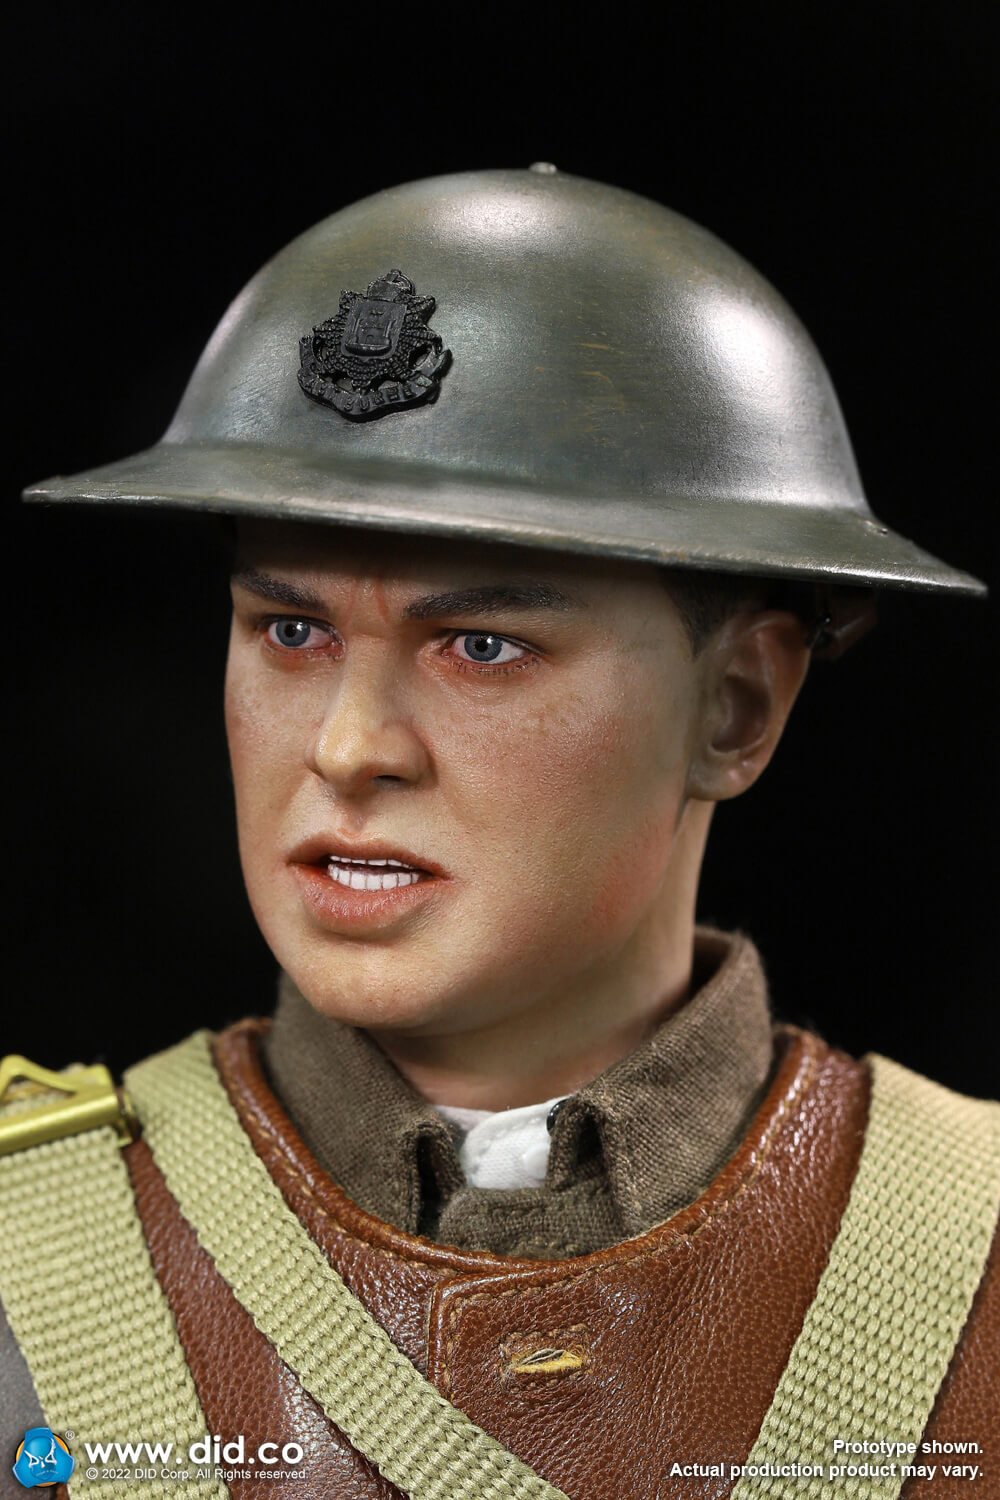 NEW PRODUCT: DiD: B11013 – 1/6 scale WWI British Infantry Lance Corporal Tom & E60064 – WWI Trench Diorama Set B 17298